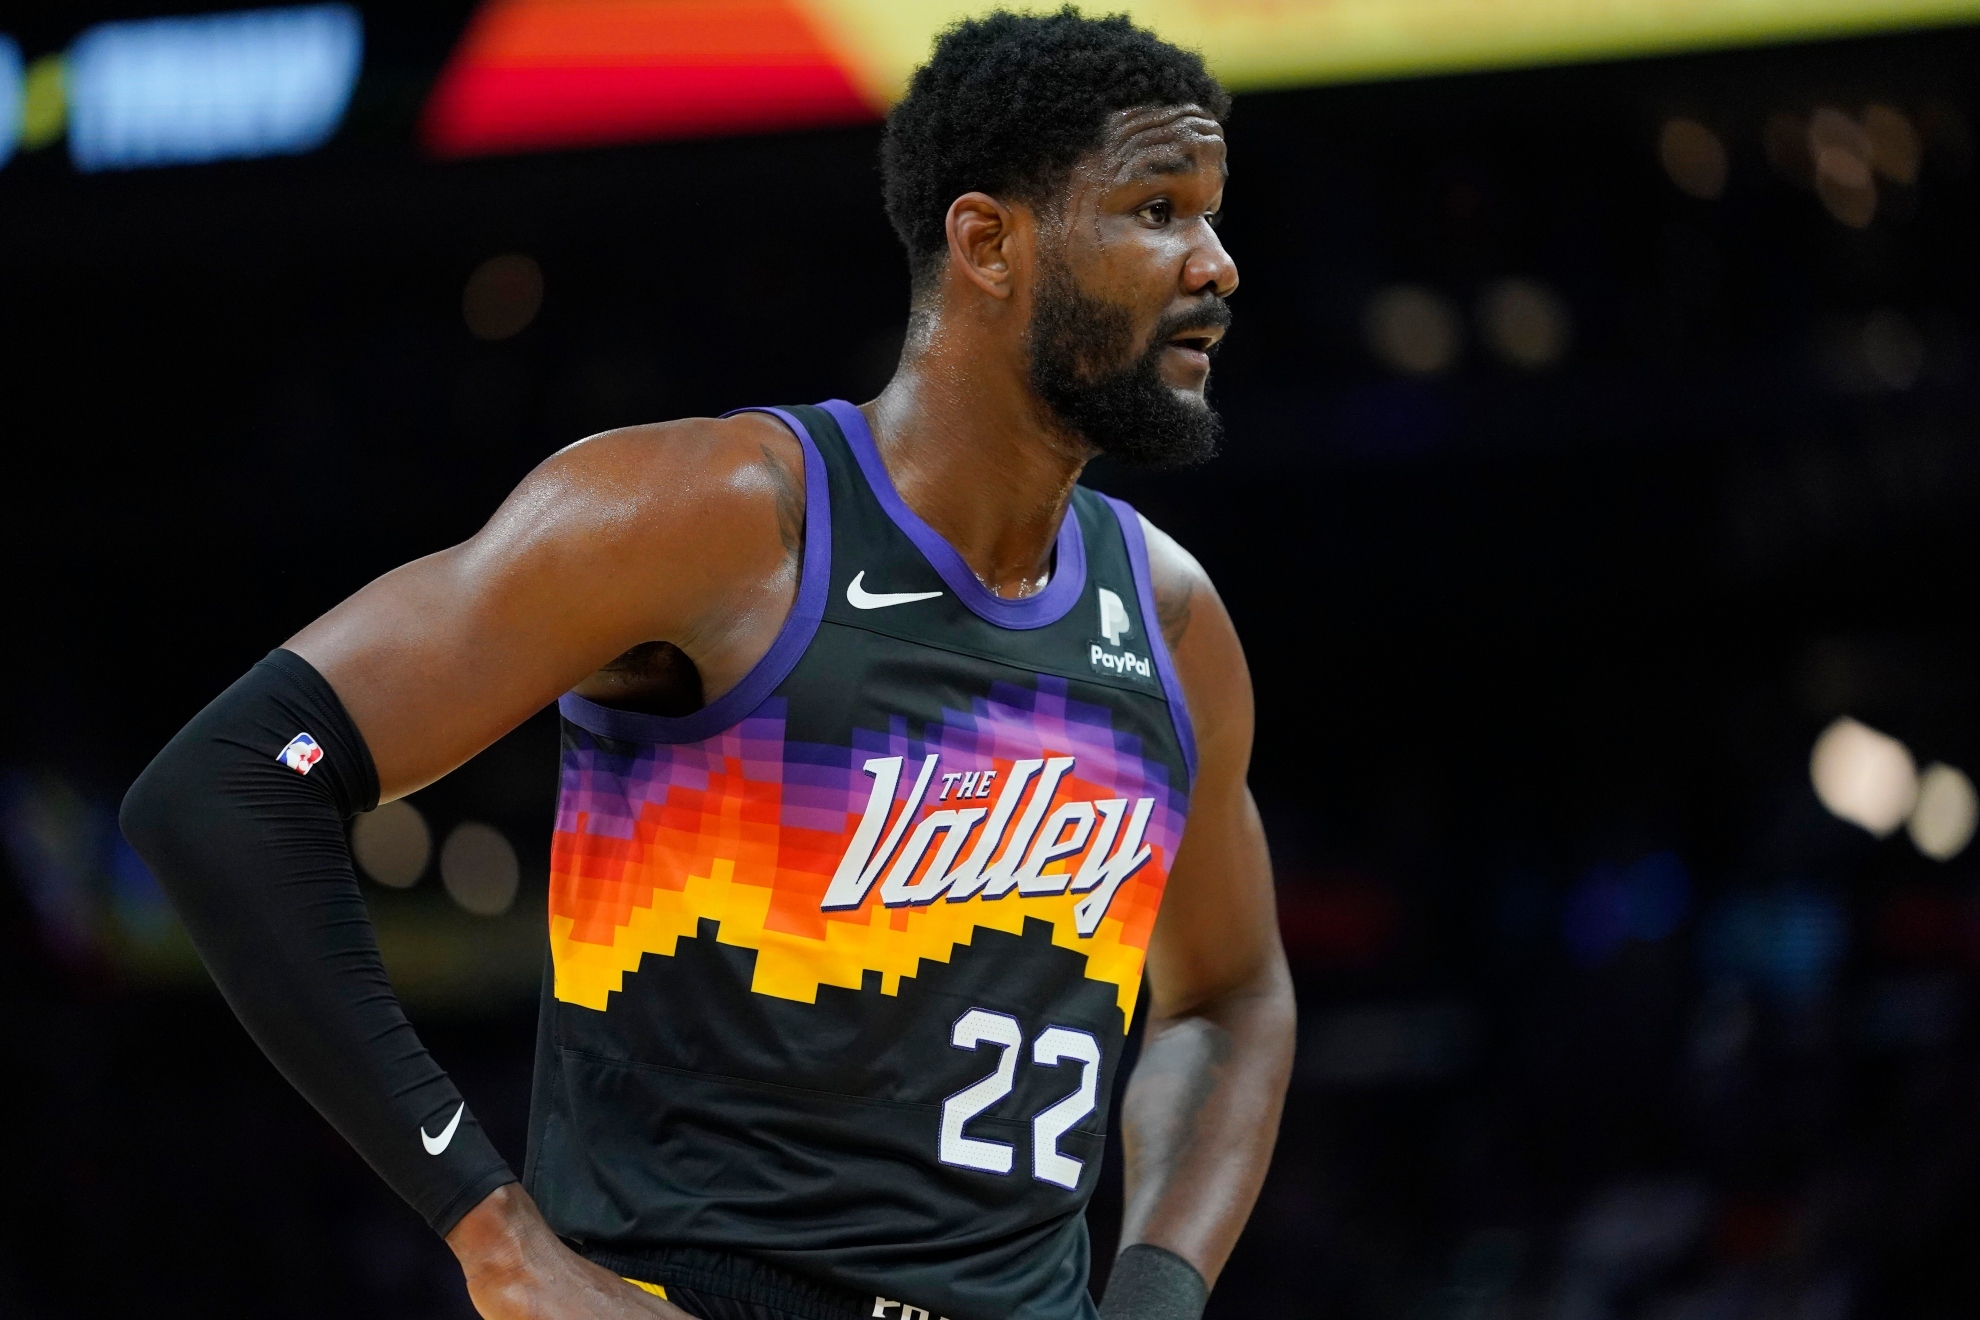 Deandre Ayton opens up: I can feel the world hating me